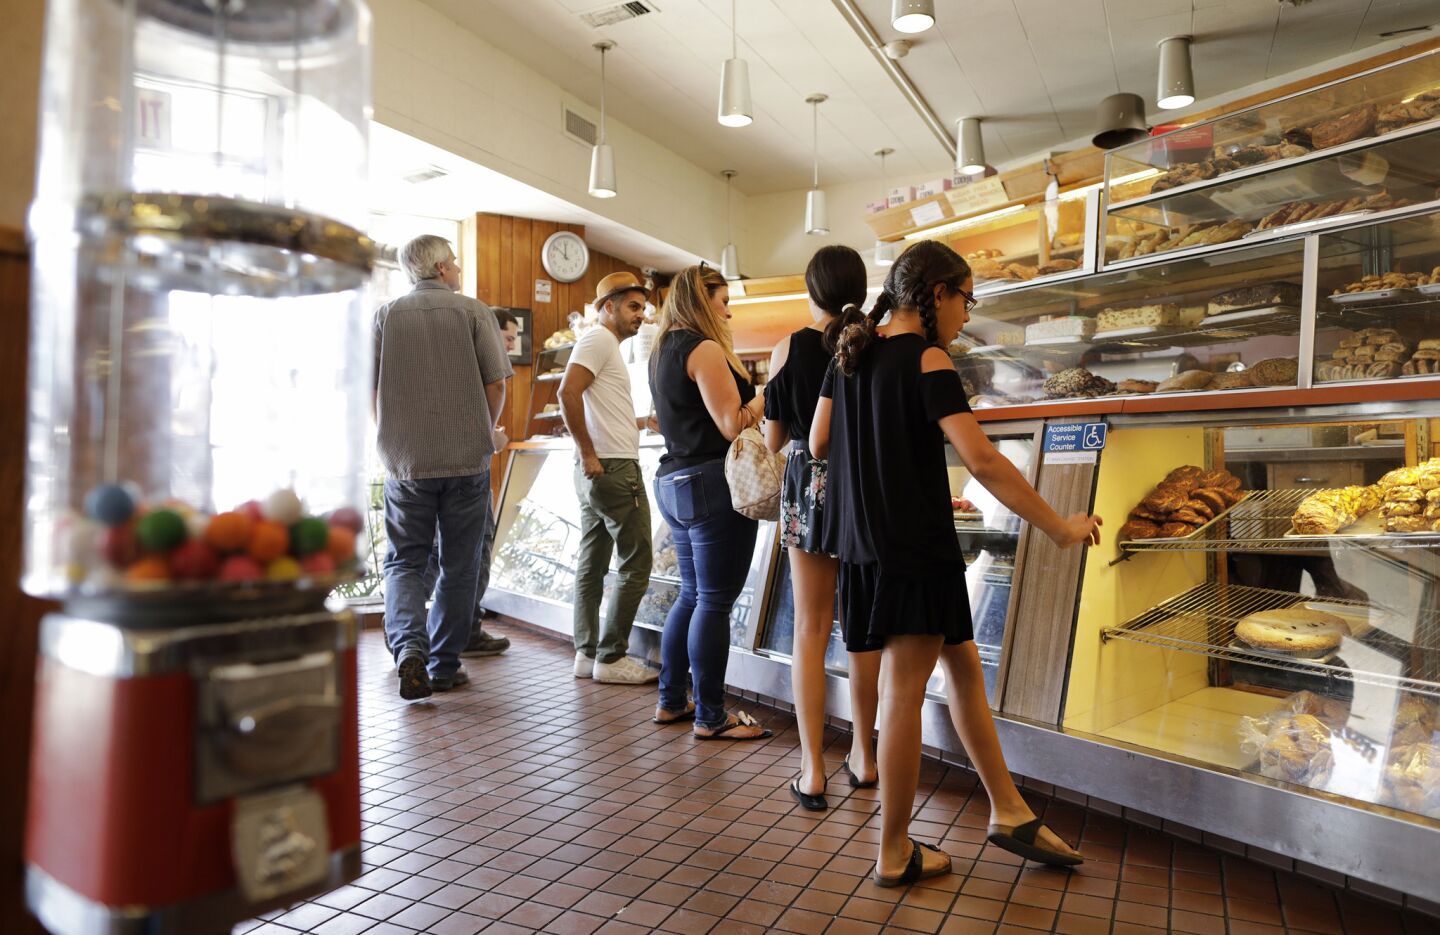 Customers line up for baked goods at Canter's.